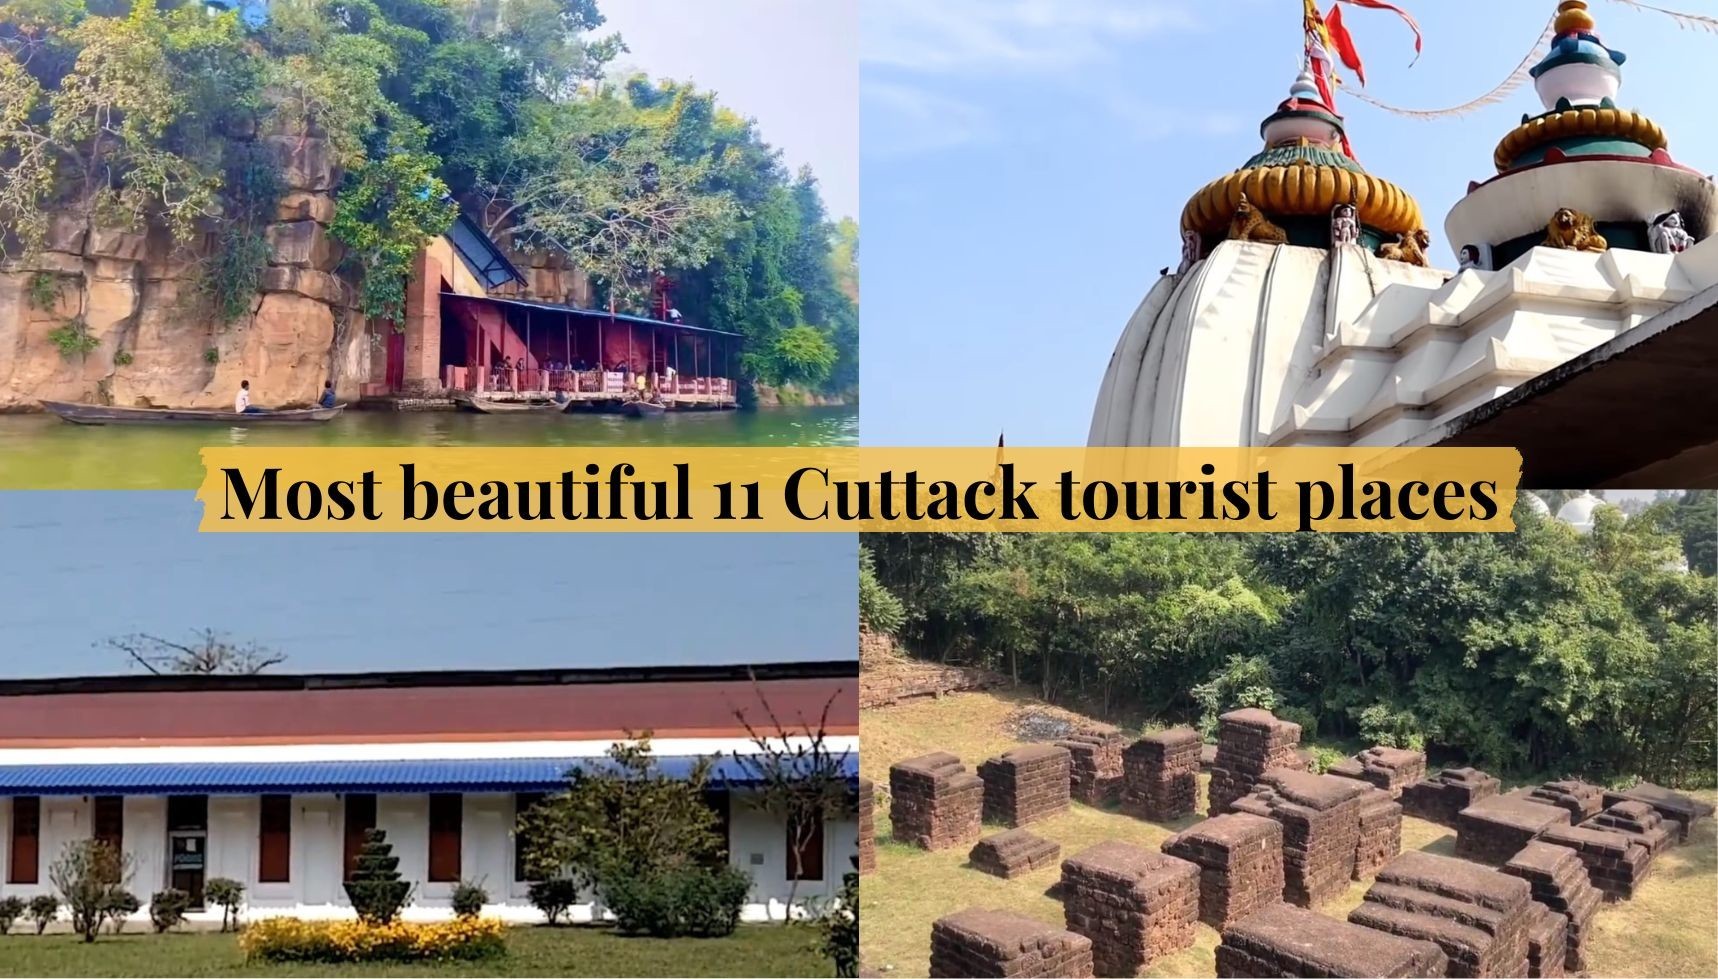 Explore the 11 Most Beautiful Cuttack Tourist Places